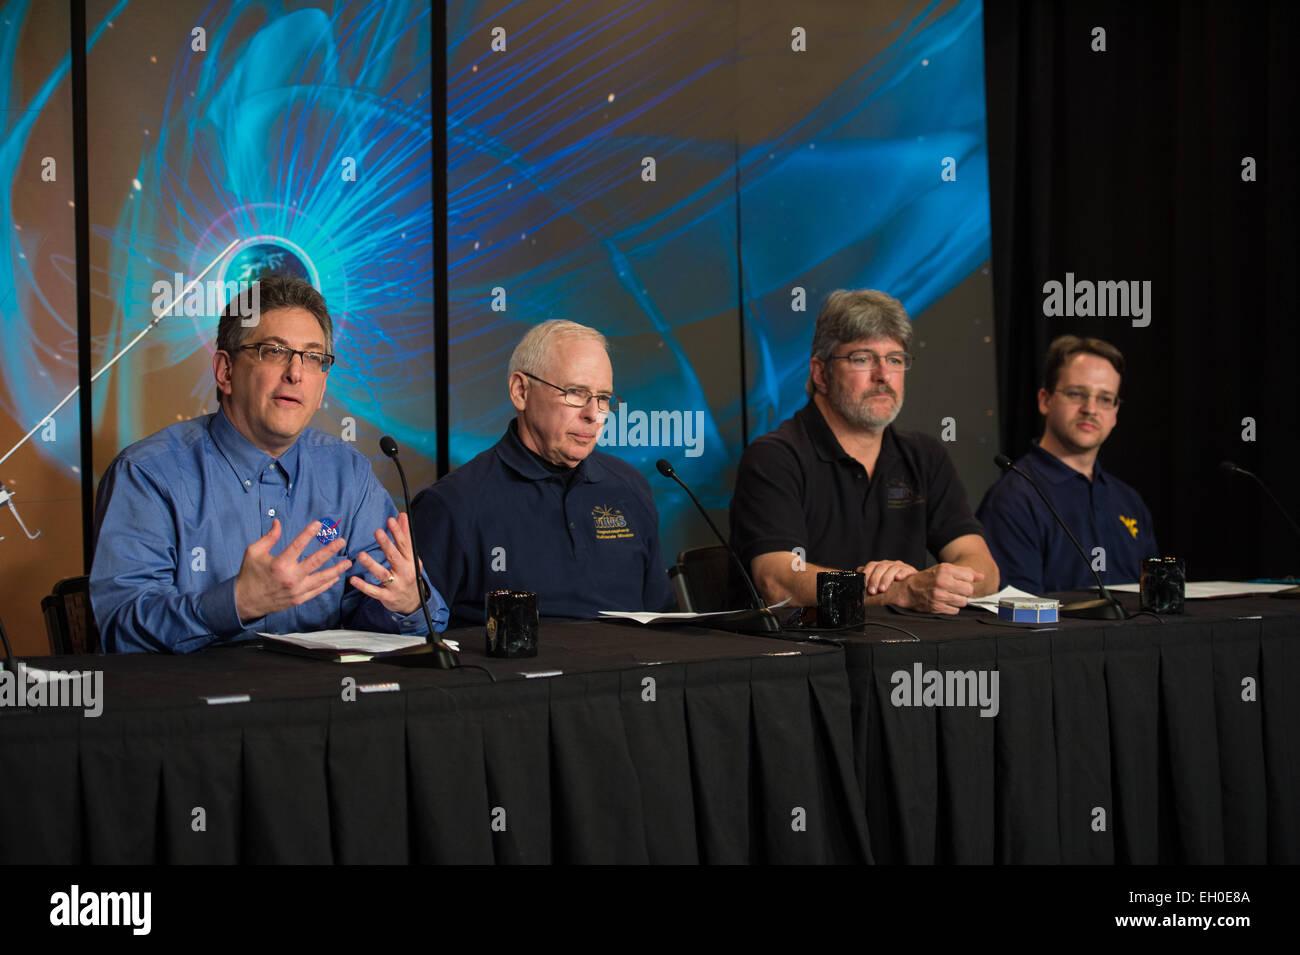 Jeff Newmark, interim director, Heliophysics Division, NASA Headquarters, left, Jim Burch, principal investigator, MMS Instrument Suite, Southwest Research Institute, second from left, Craig Tooley, MMS project manager, NASA’s Goddard Space Flight Center, second from right, and Paul Cassak, associate professor, West Virginia University, right, are seen during a briefing about the upcoming launch of the Magnetospheric Multiscale (MMS) mission, Wednesday, February 25, 2015, at NASA Headquarters in Washington DC. The mission is scheduled for a March 12 launch from Cape Canaveral Air Force Station Stock Photo